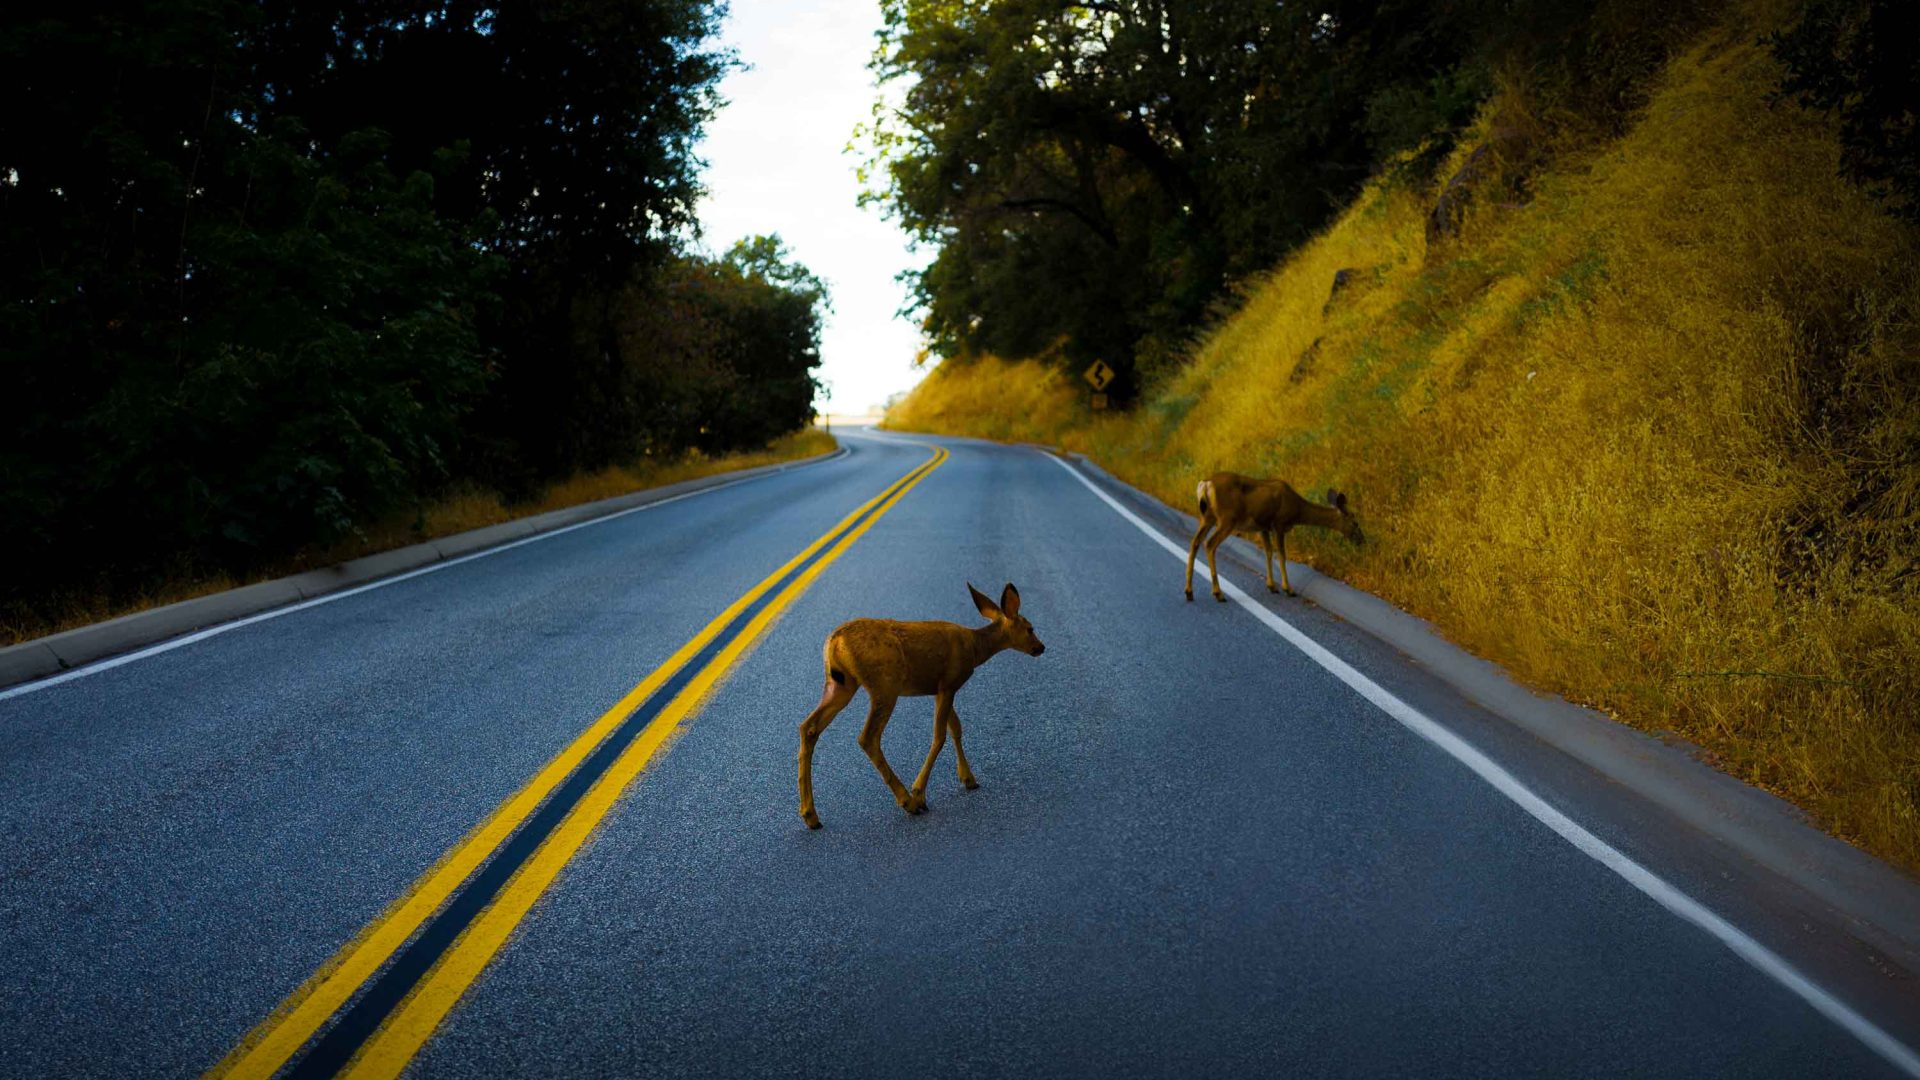 This too shall pass: The wildlife crossings saving lives—animals and people